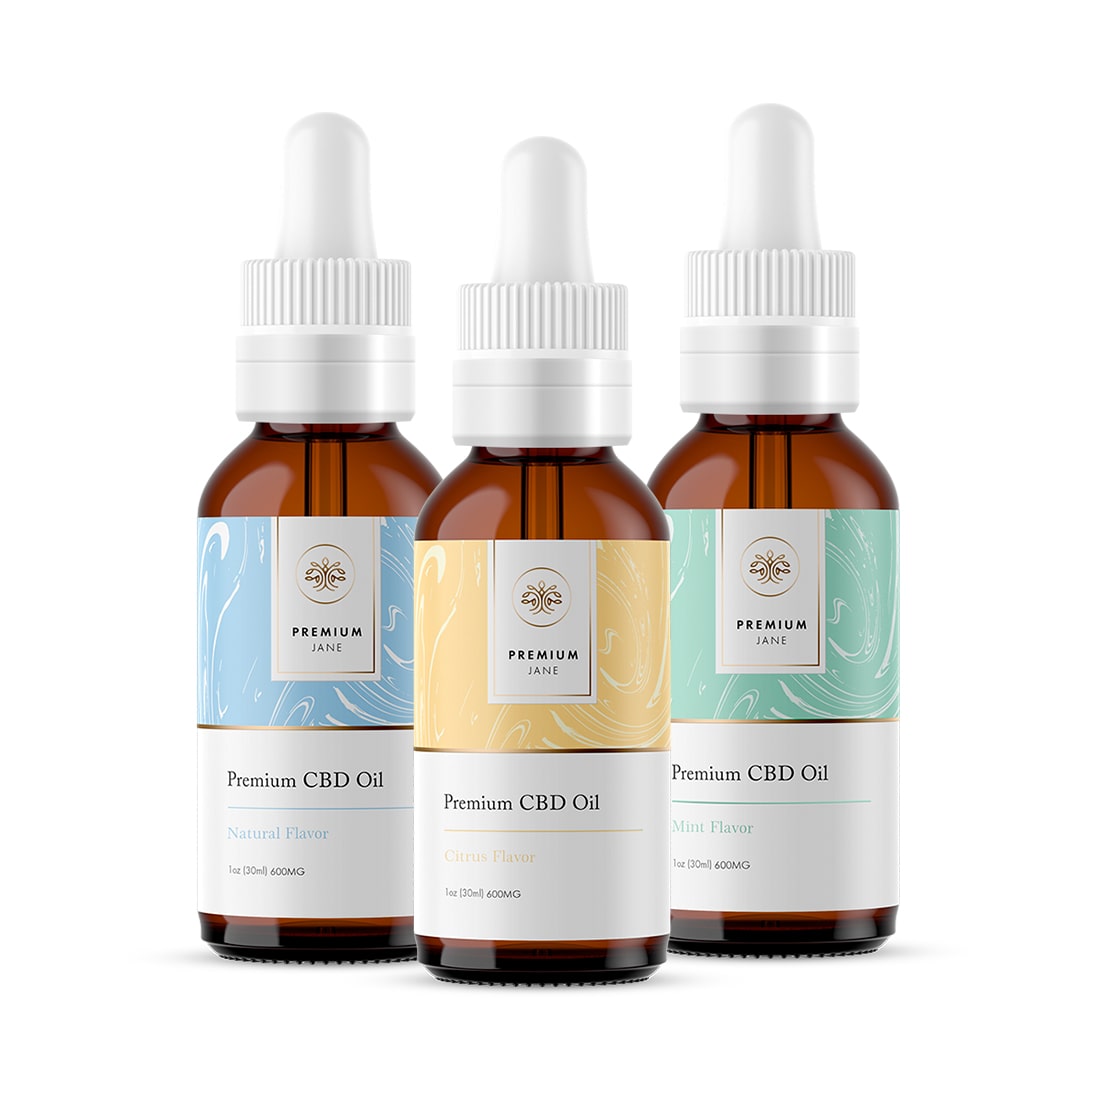 The Definitive Review of Top CBD Oils